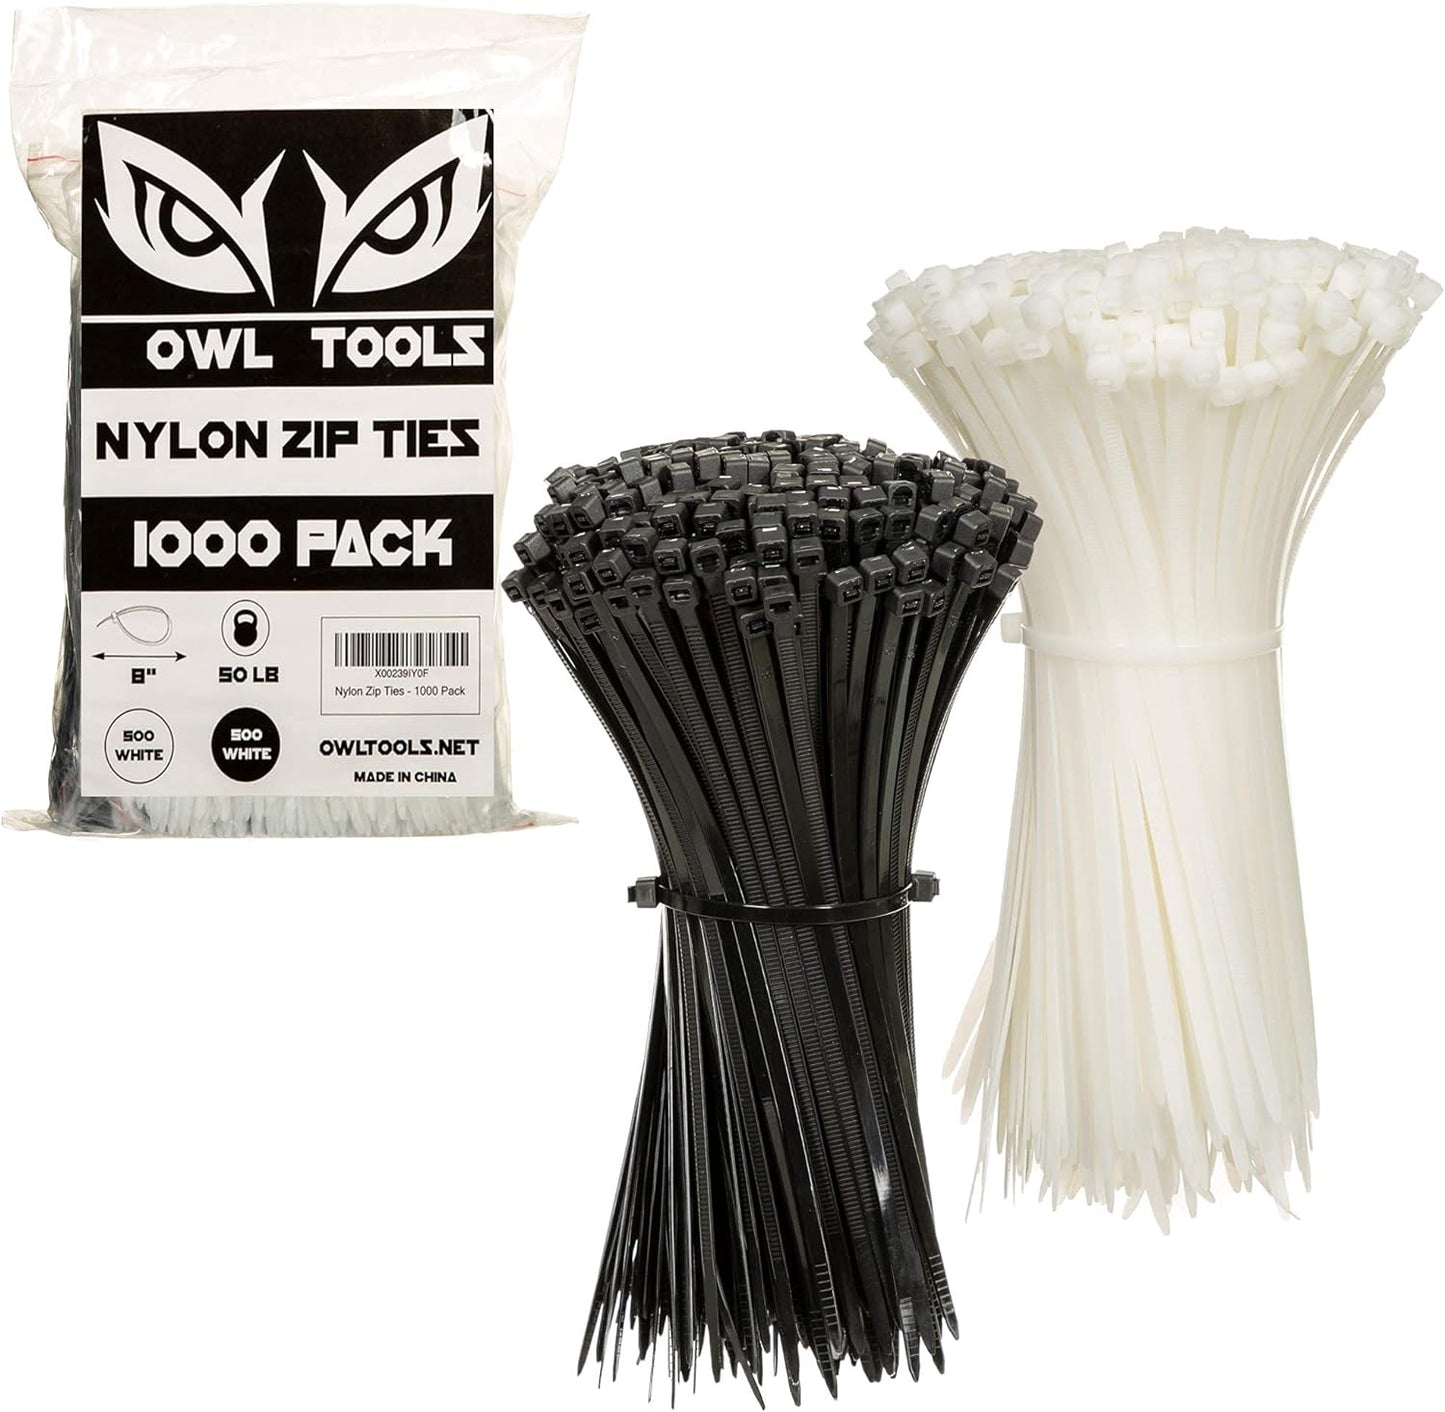 Owl Tools 8 inch Zip Ties Bulk Pack of 1000-50lb Strength - 8inches Cable Ties in Black and White